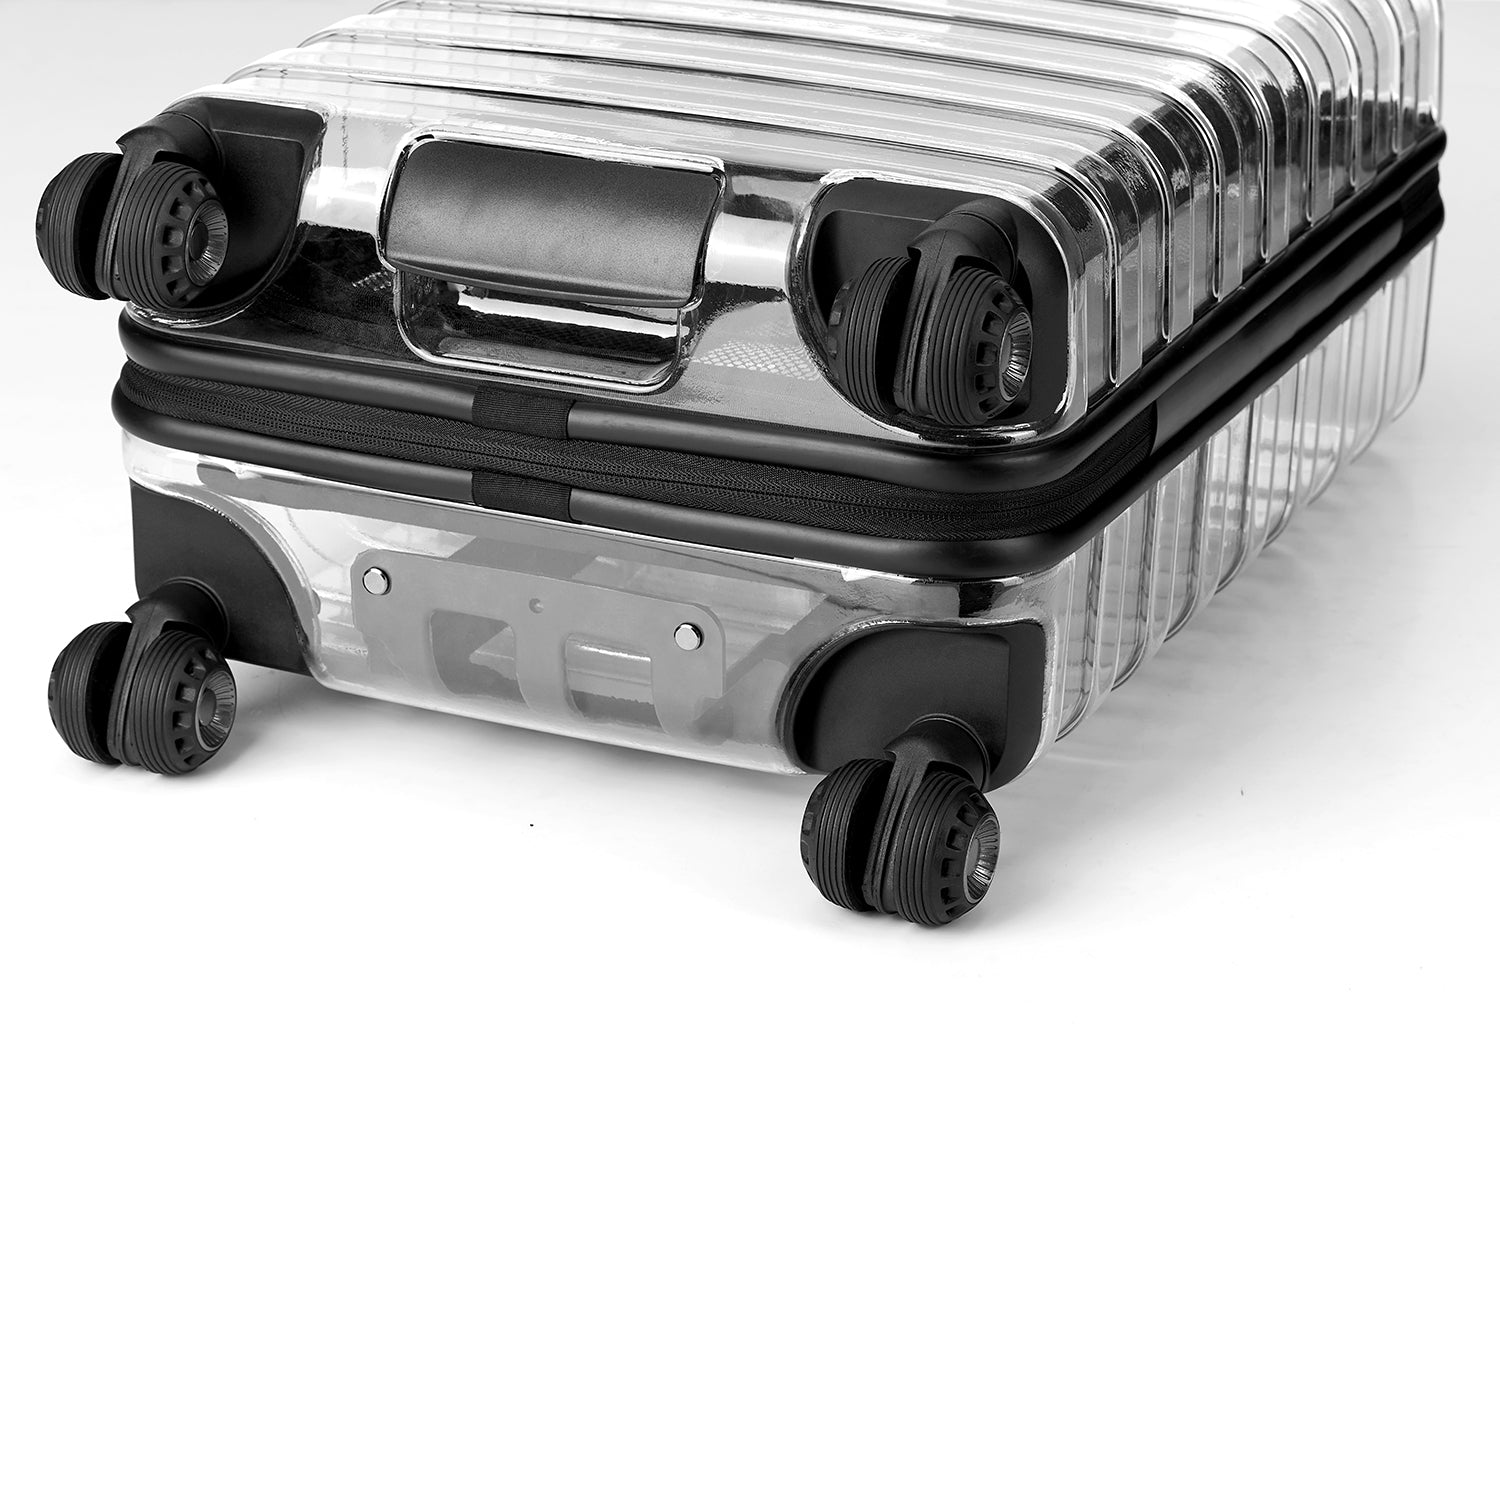 The Millennial Transparent Carry-On 22&quot; Hardside Spinner Luggage